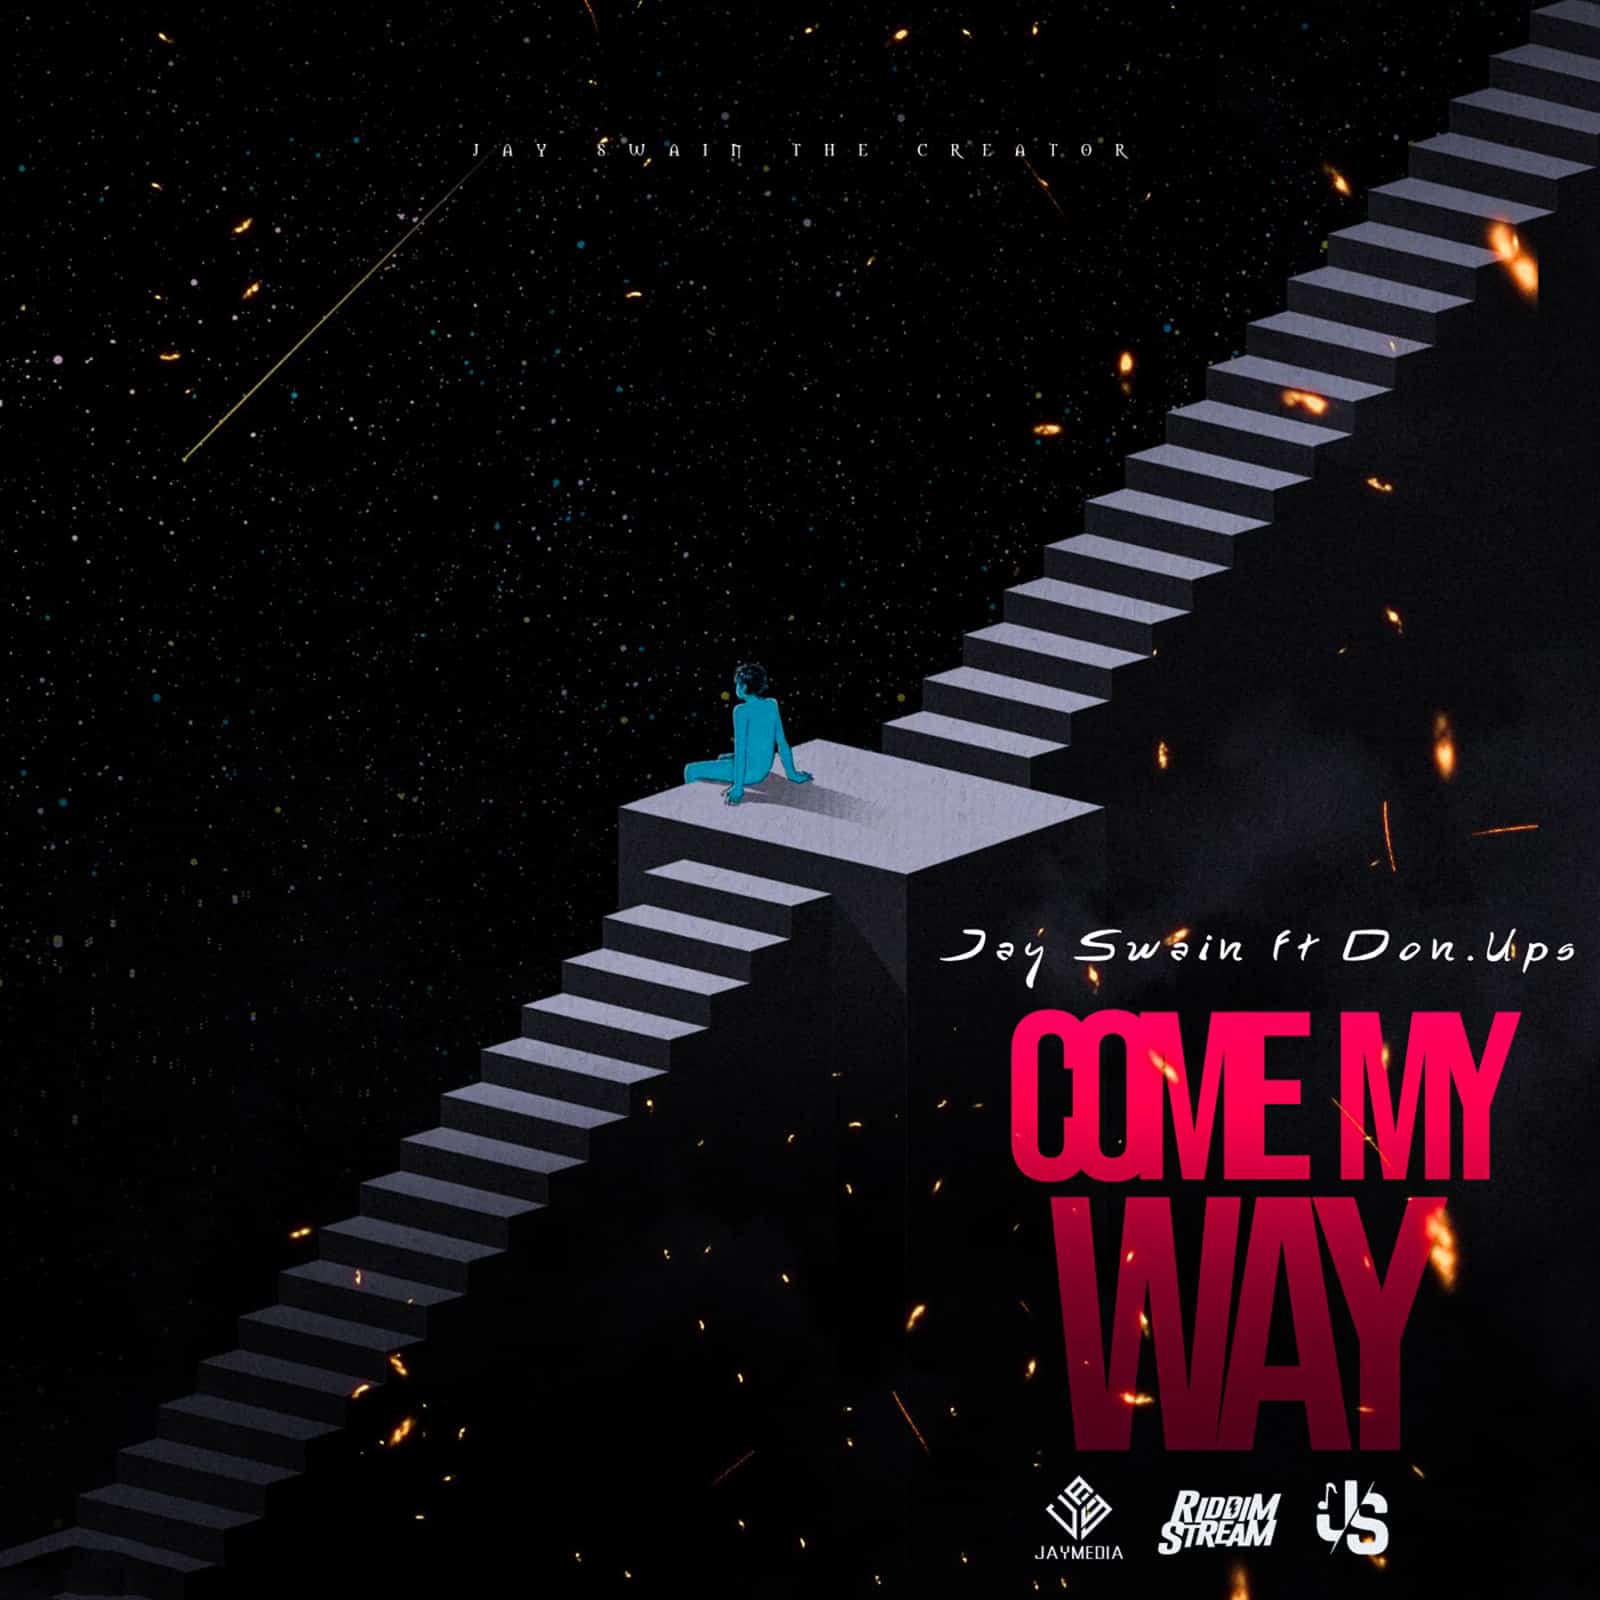 Jay Swain Feat. Don.Ups - Come My Way